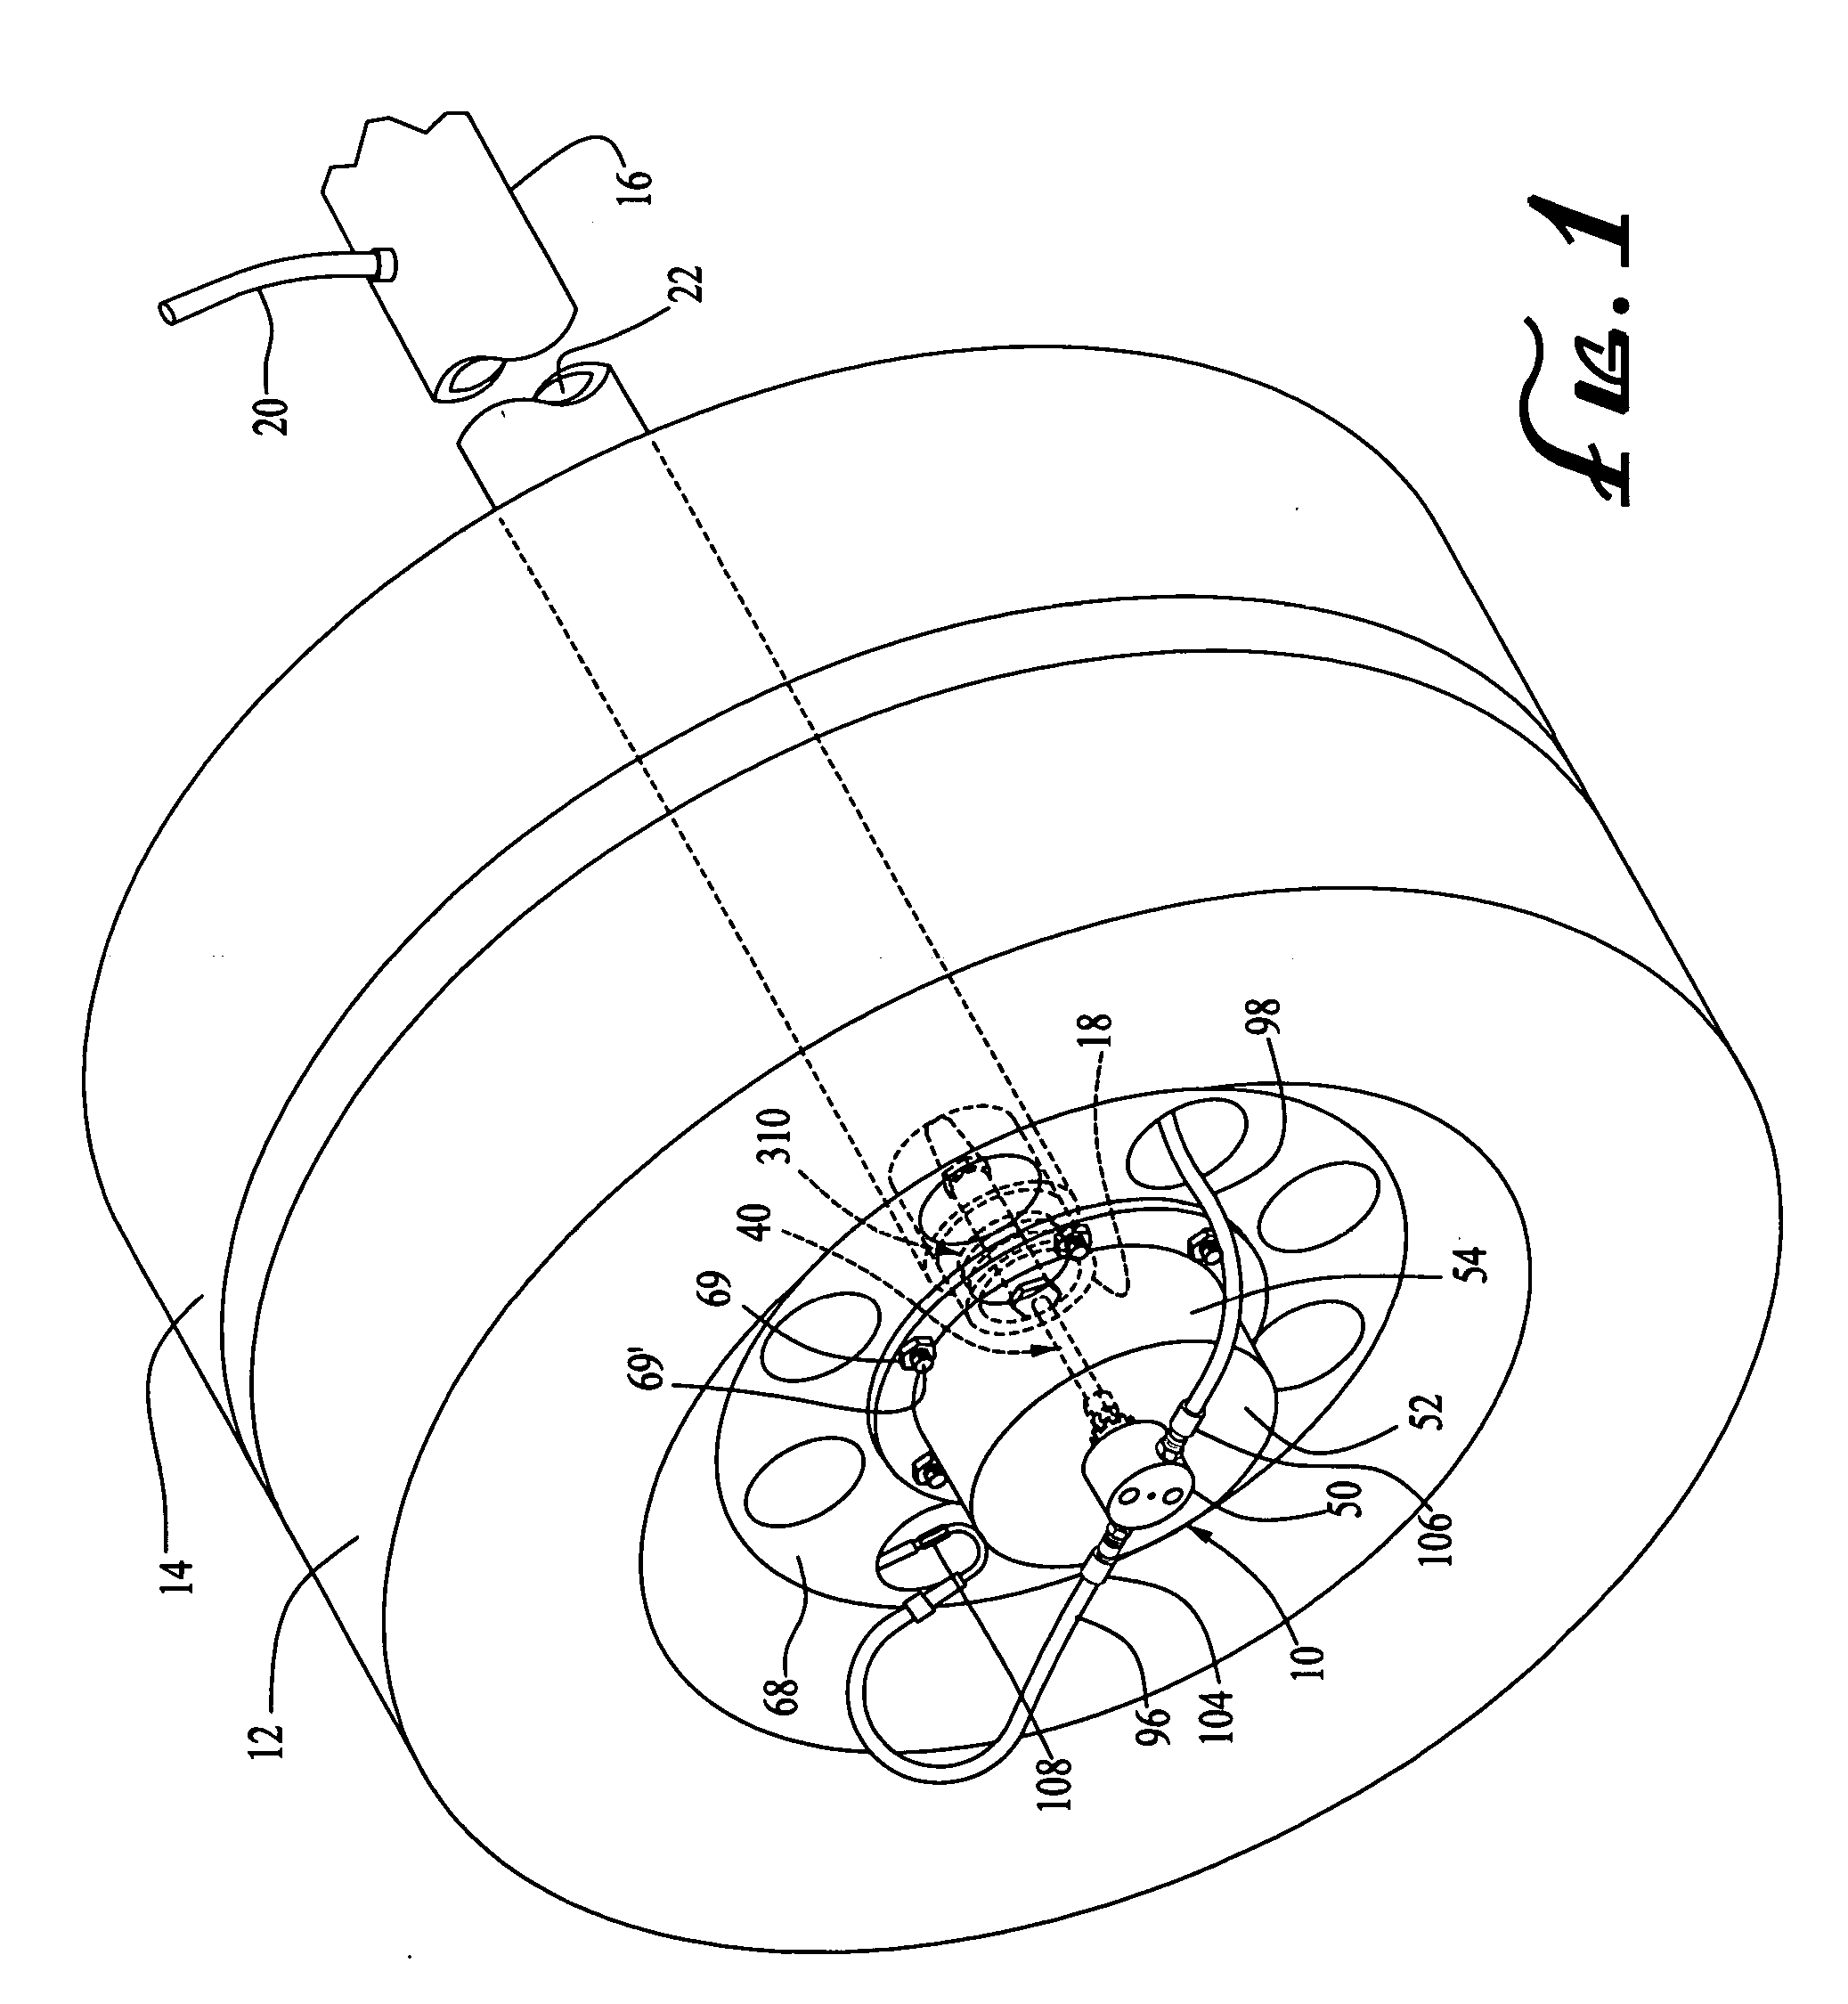 Rotary union assembly for use in air pressure inflation systems for tractor trailer tires